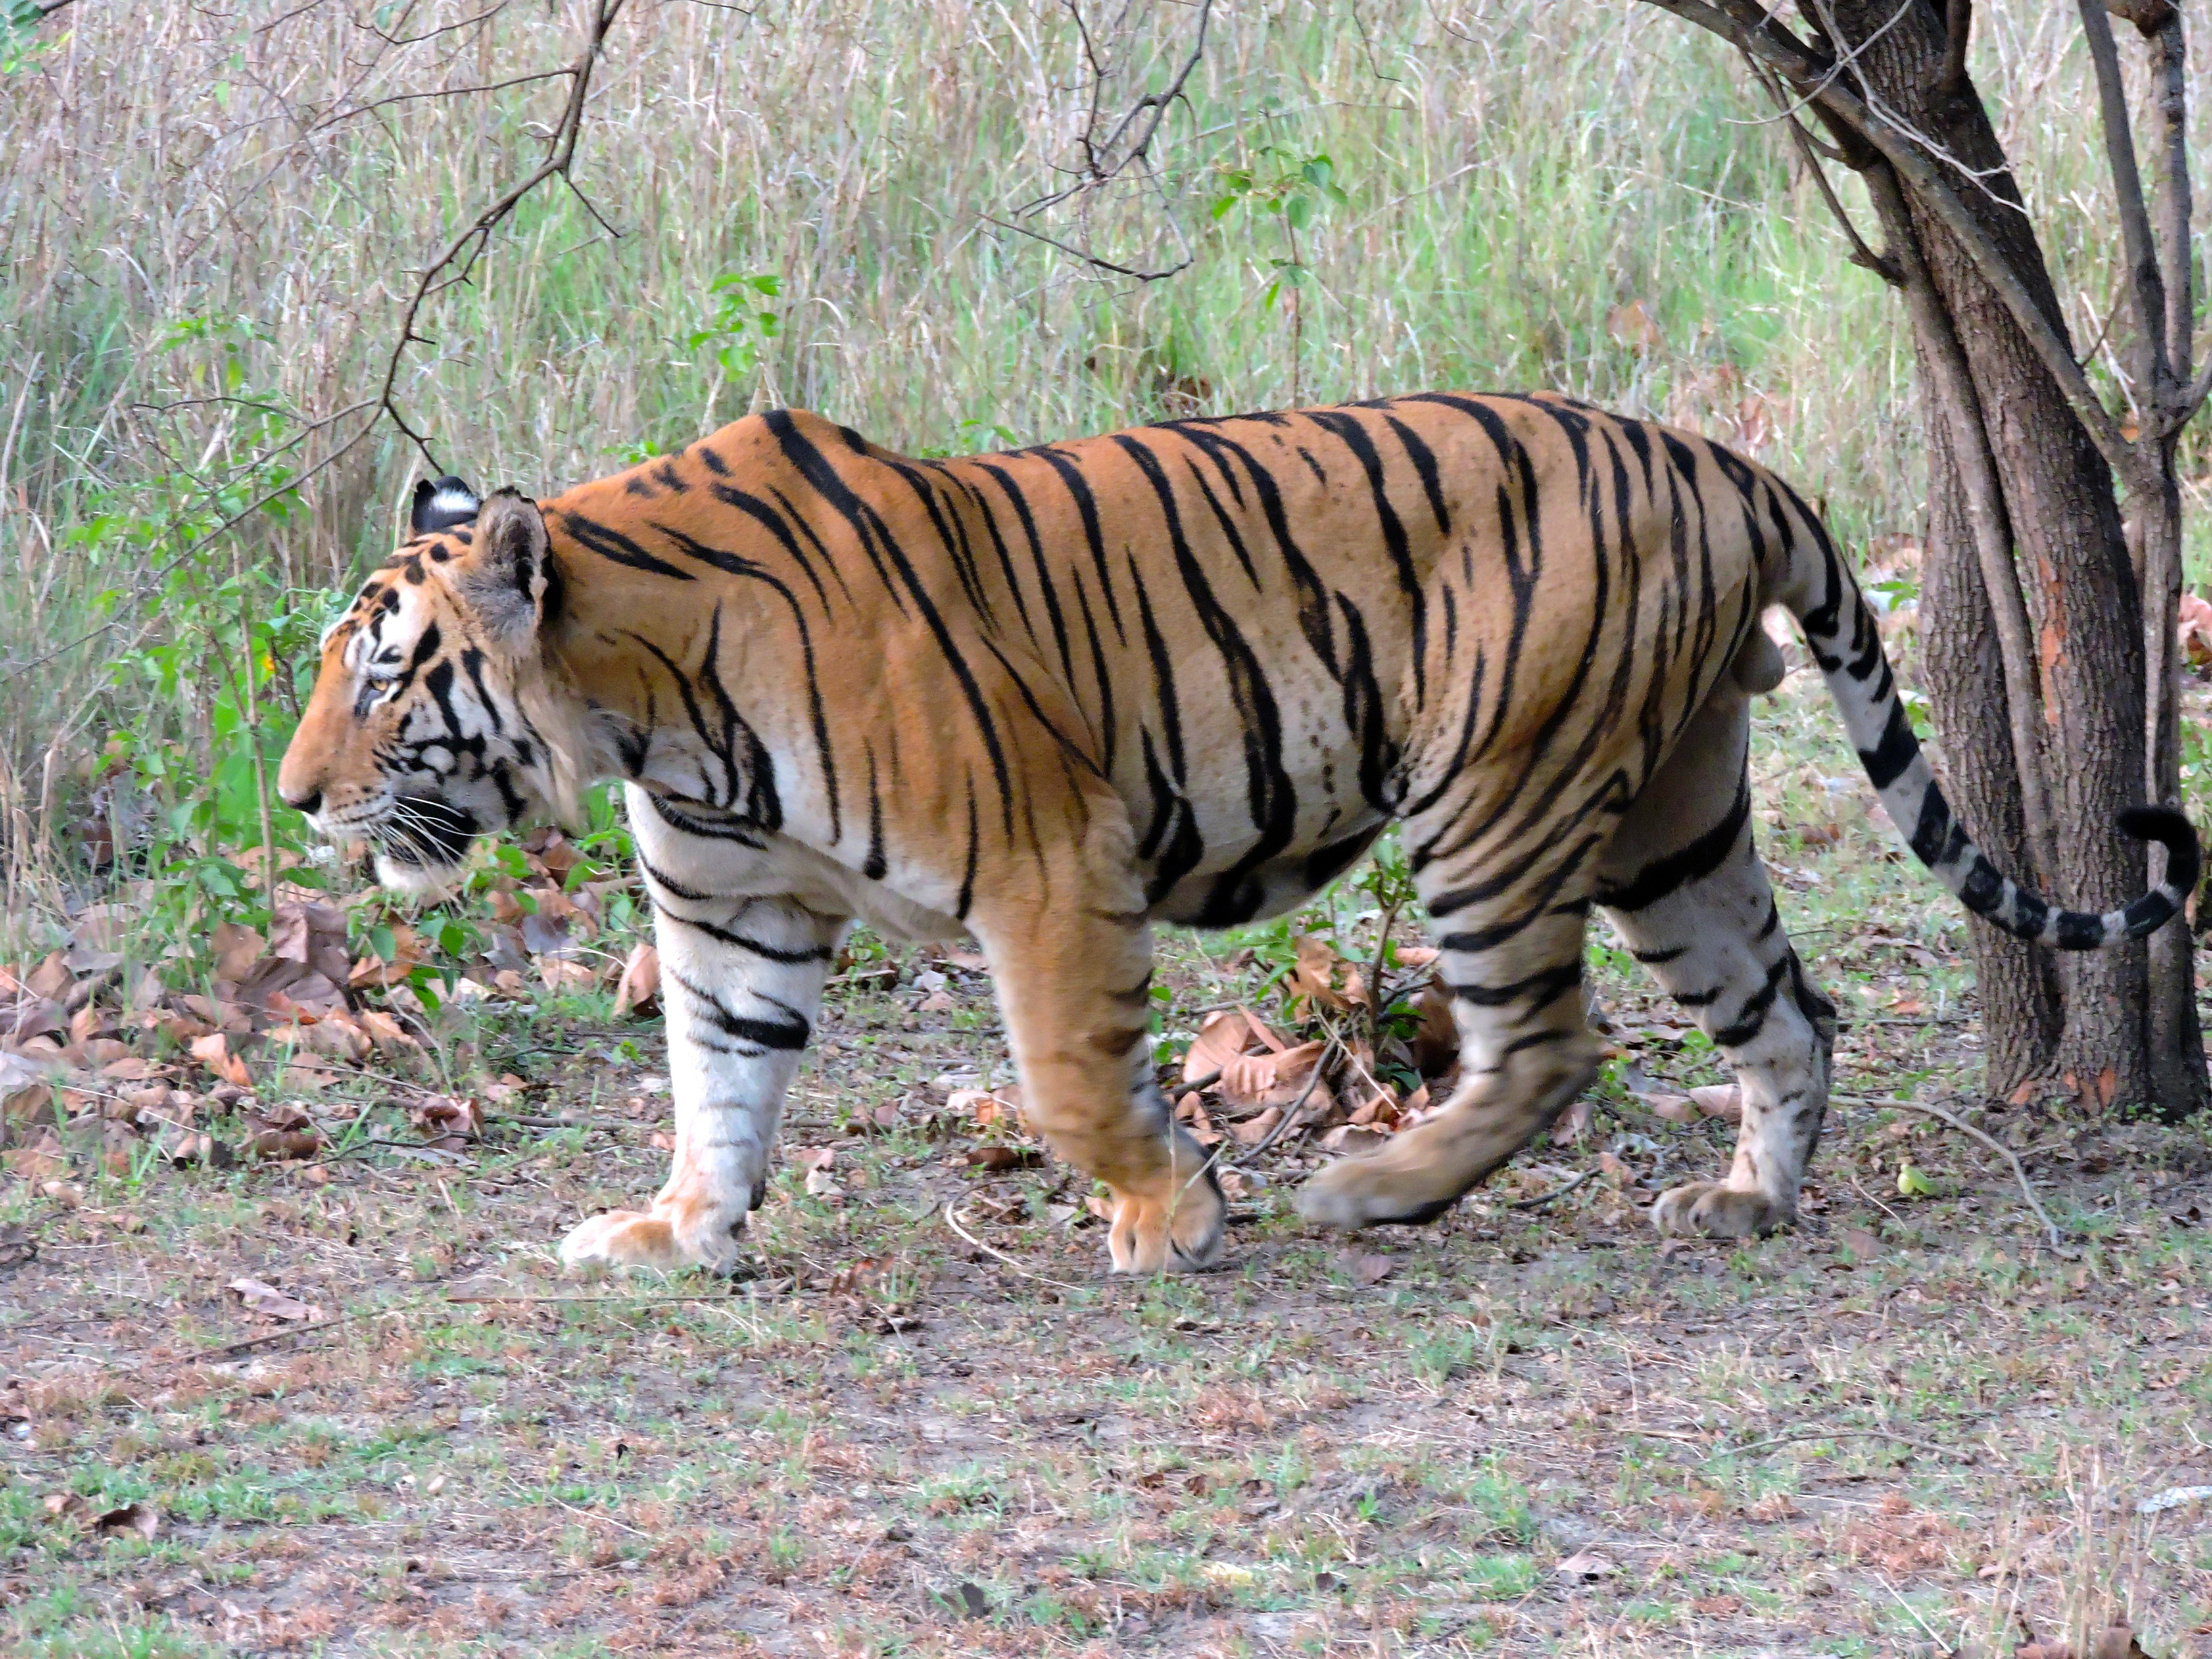 What are the competitors of the Bengal tiger?